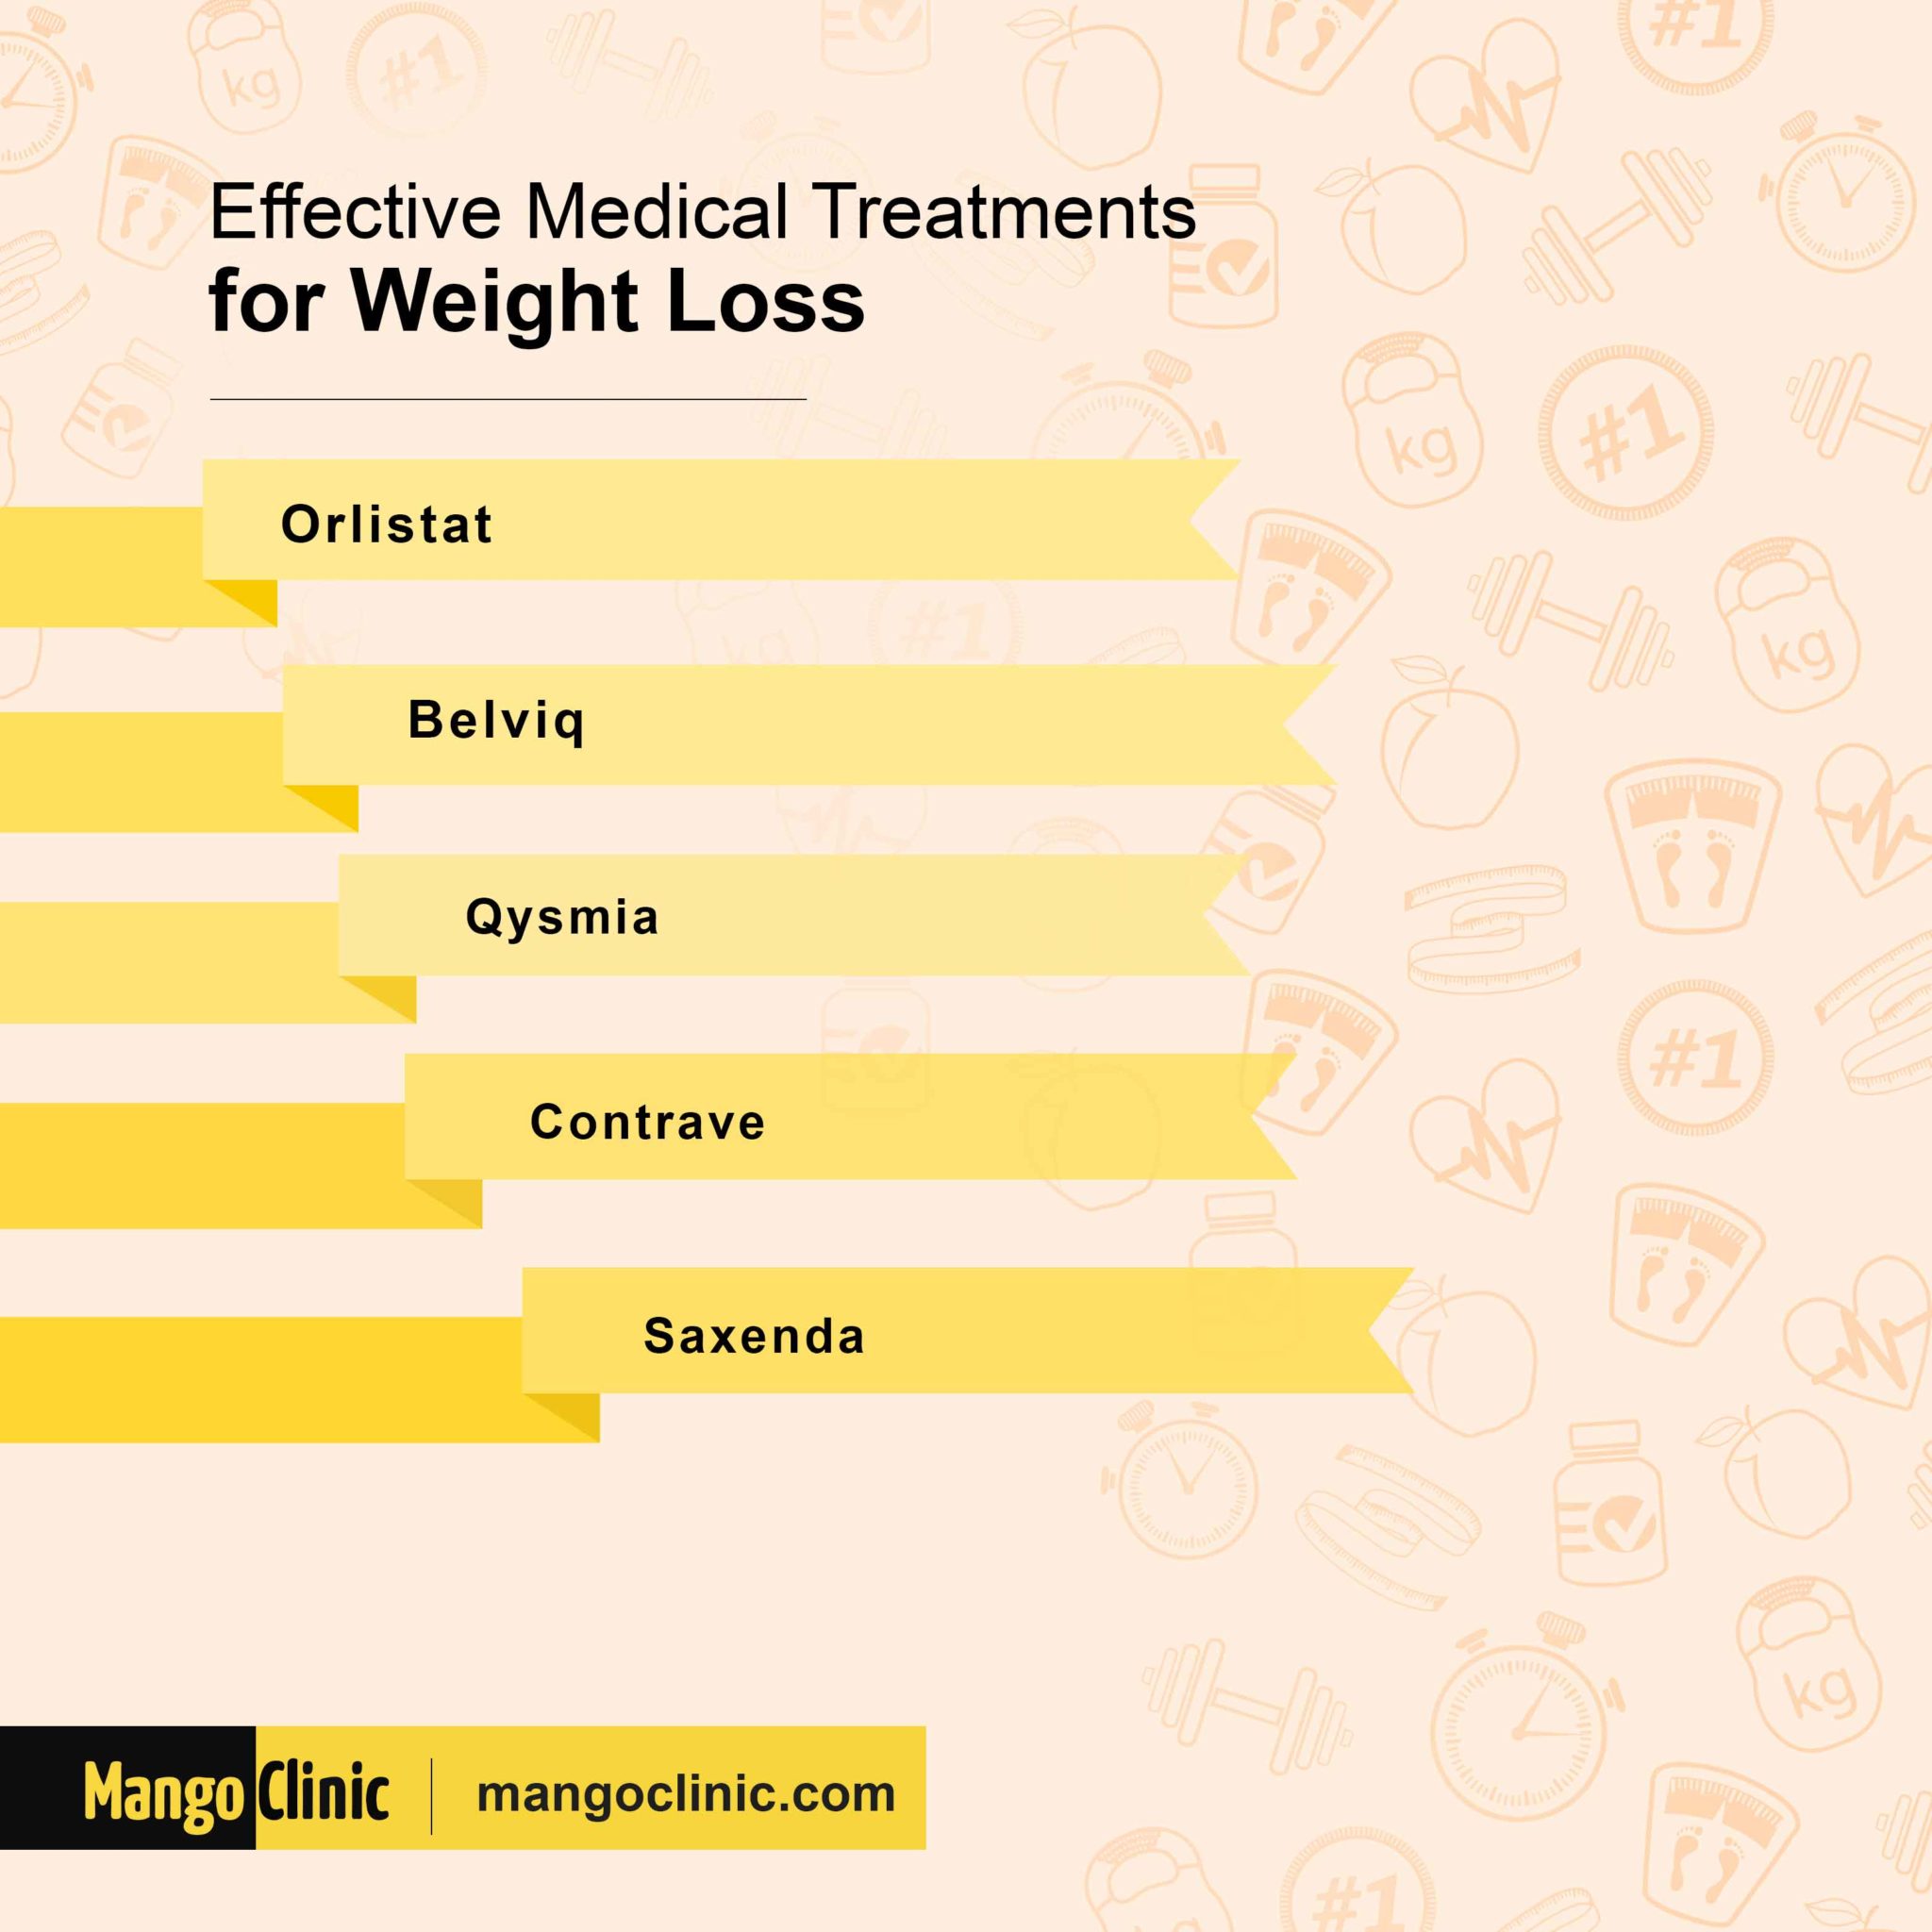 How Mango Clinic Helps You Lose Weight During Quarantine